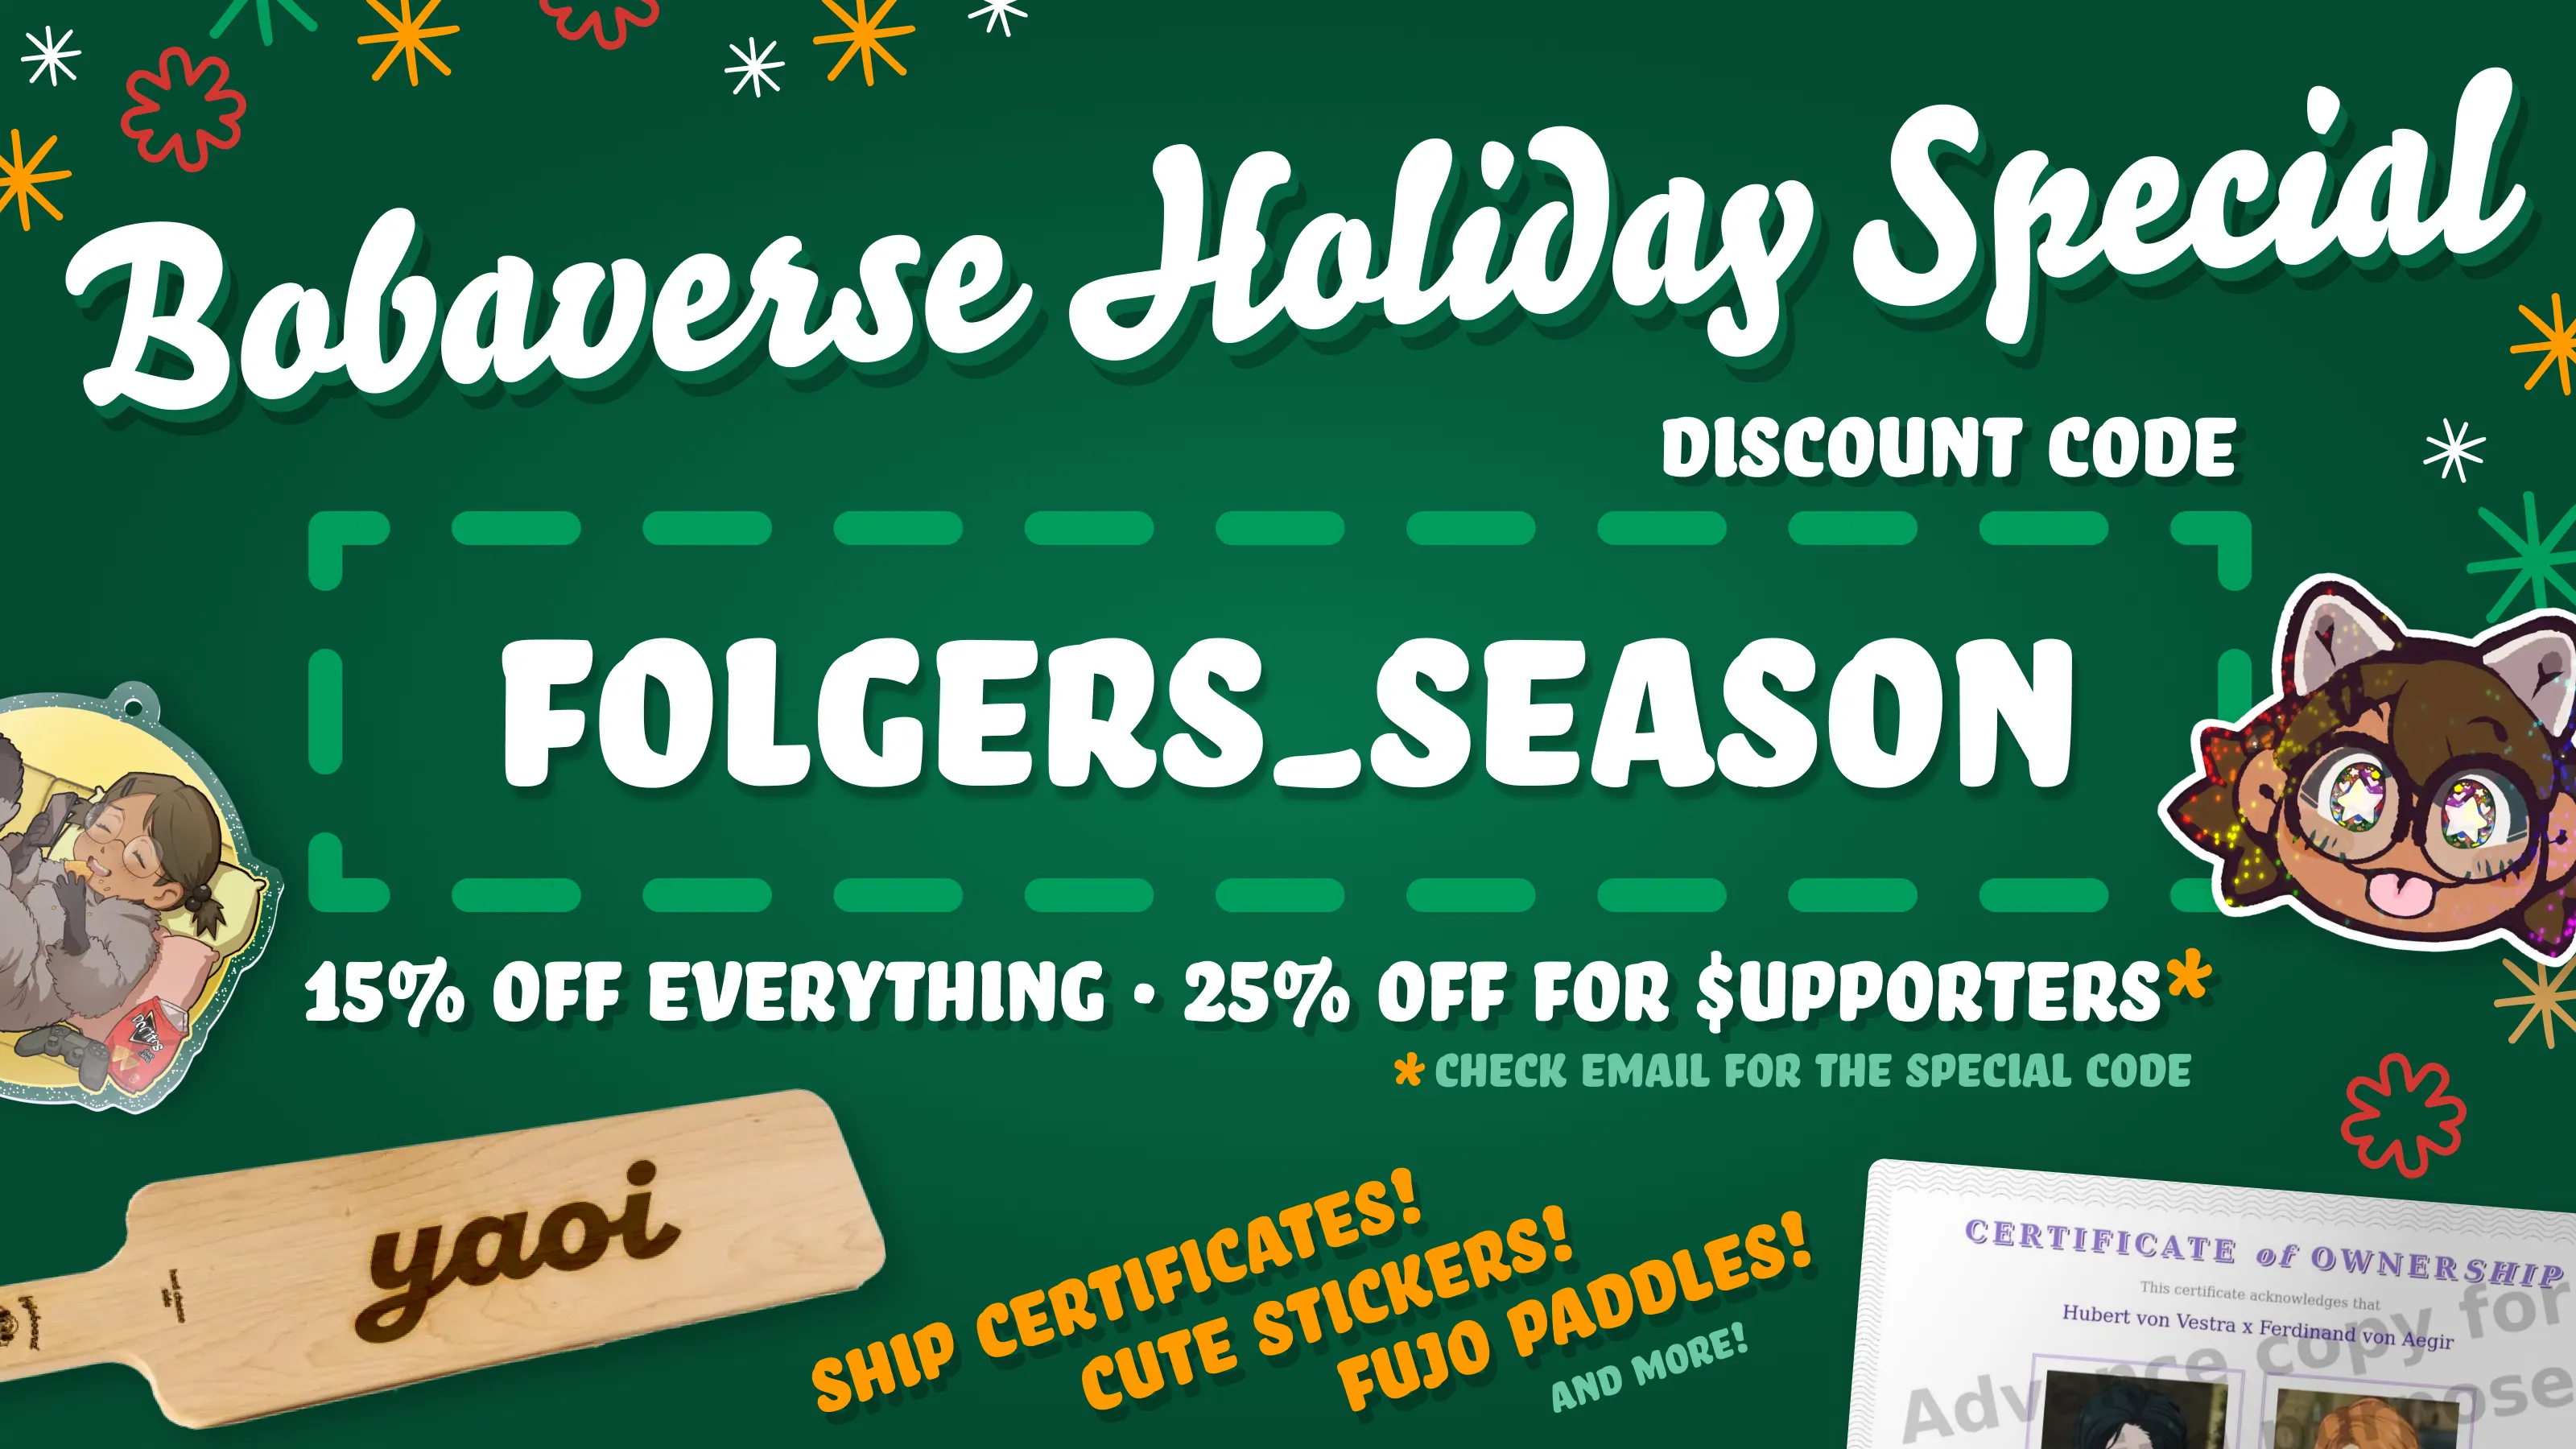 Holiday sale promo for various Bobaverse merch arranged on a festive dark green
background with primarily white text, along with red and orange accents for text
and snowflake-esque adornments. 

Bobaverse Holiday Special Discount code: FOLGERS_SEASON

15% off everything 25% off for supporters* (the "s" is written with a dollar
sign) *check email for the special code

Ship certificates! (Displayed: a RobinBoob certificate of ownership for Hubert
von Vestra x Ferdinand von Aegir) Cute stickers! (Boba-tan, shimmering and
sticking her tongue out) Fujo paddles! (A large "hime" fujoboard cheeseboard
with "yaoi" laser engraved onto the wood surface; yes, they're real and food
safe) And more! (A yellow Boba-tan acrylic keychain of her enjoying some snacks)